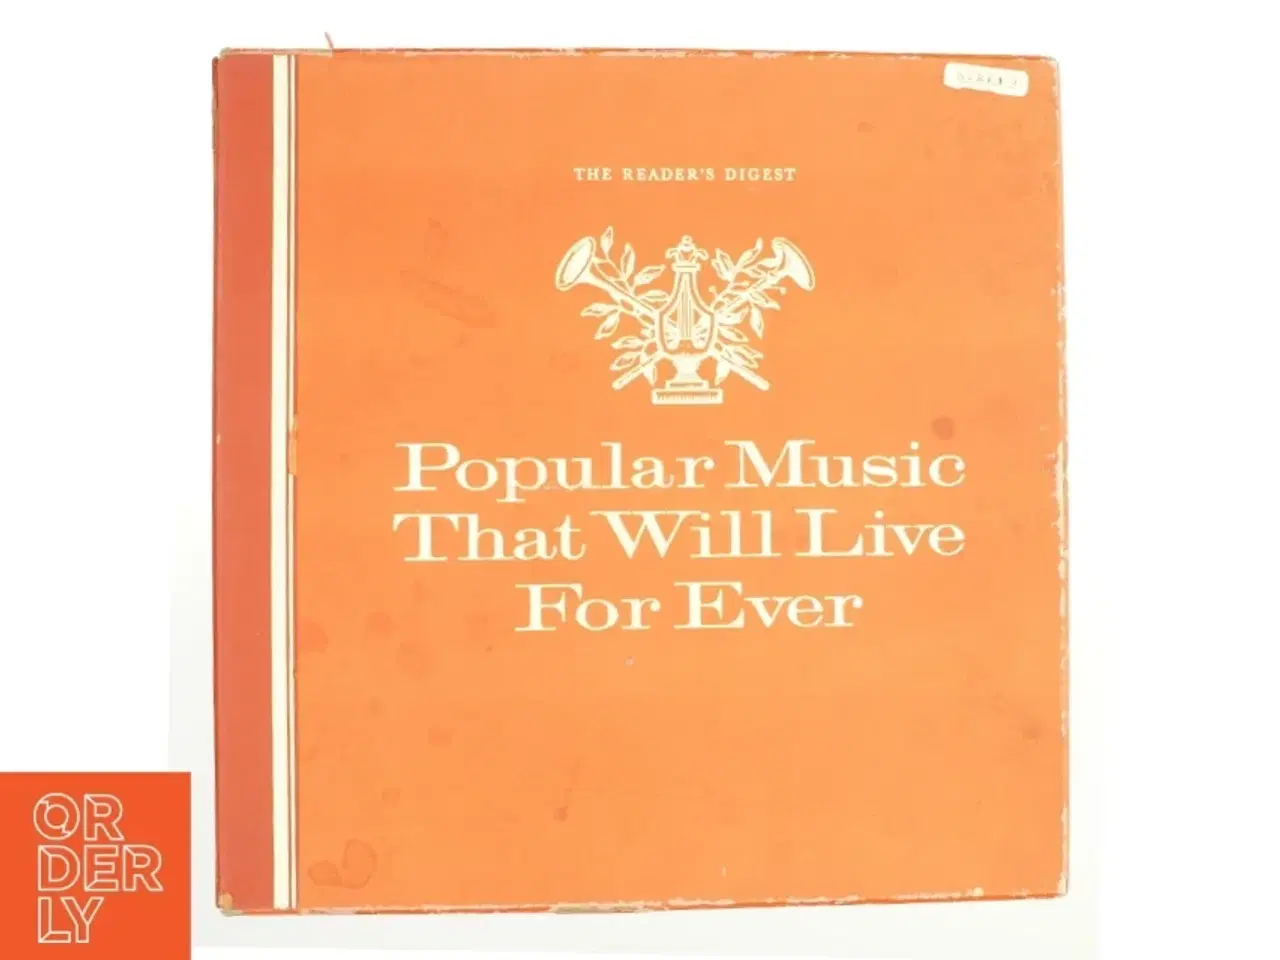 Billede 1 - Popular Music that will live forever, the readers digest record library